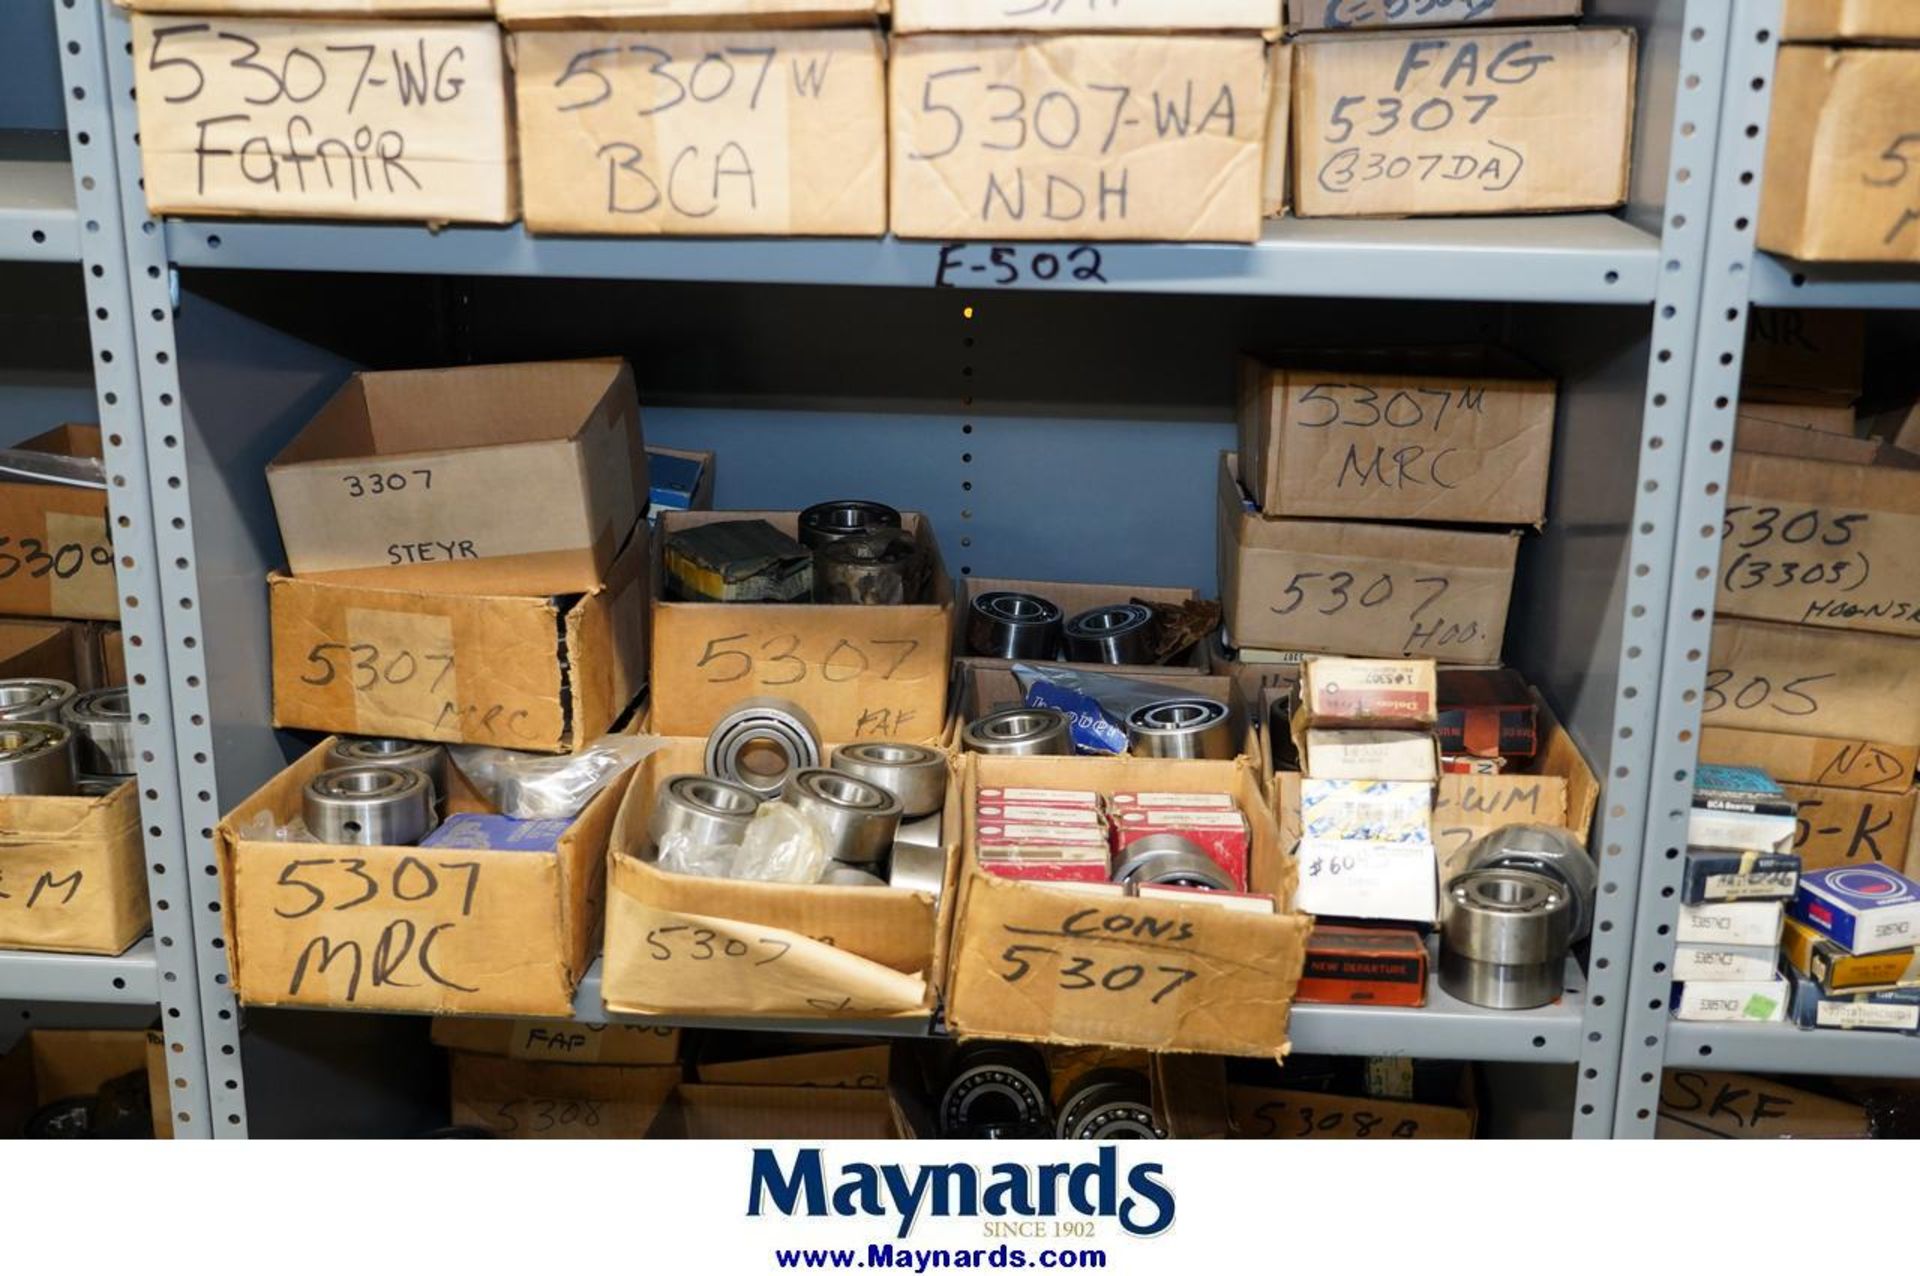 Lot of Assorted RHP,GEN,FAG,ABC,MRC, NSK,BCA, FAF,SKF,Steyr, Open Double Row Bearings - Image 5 of 7